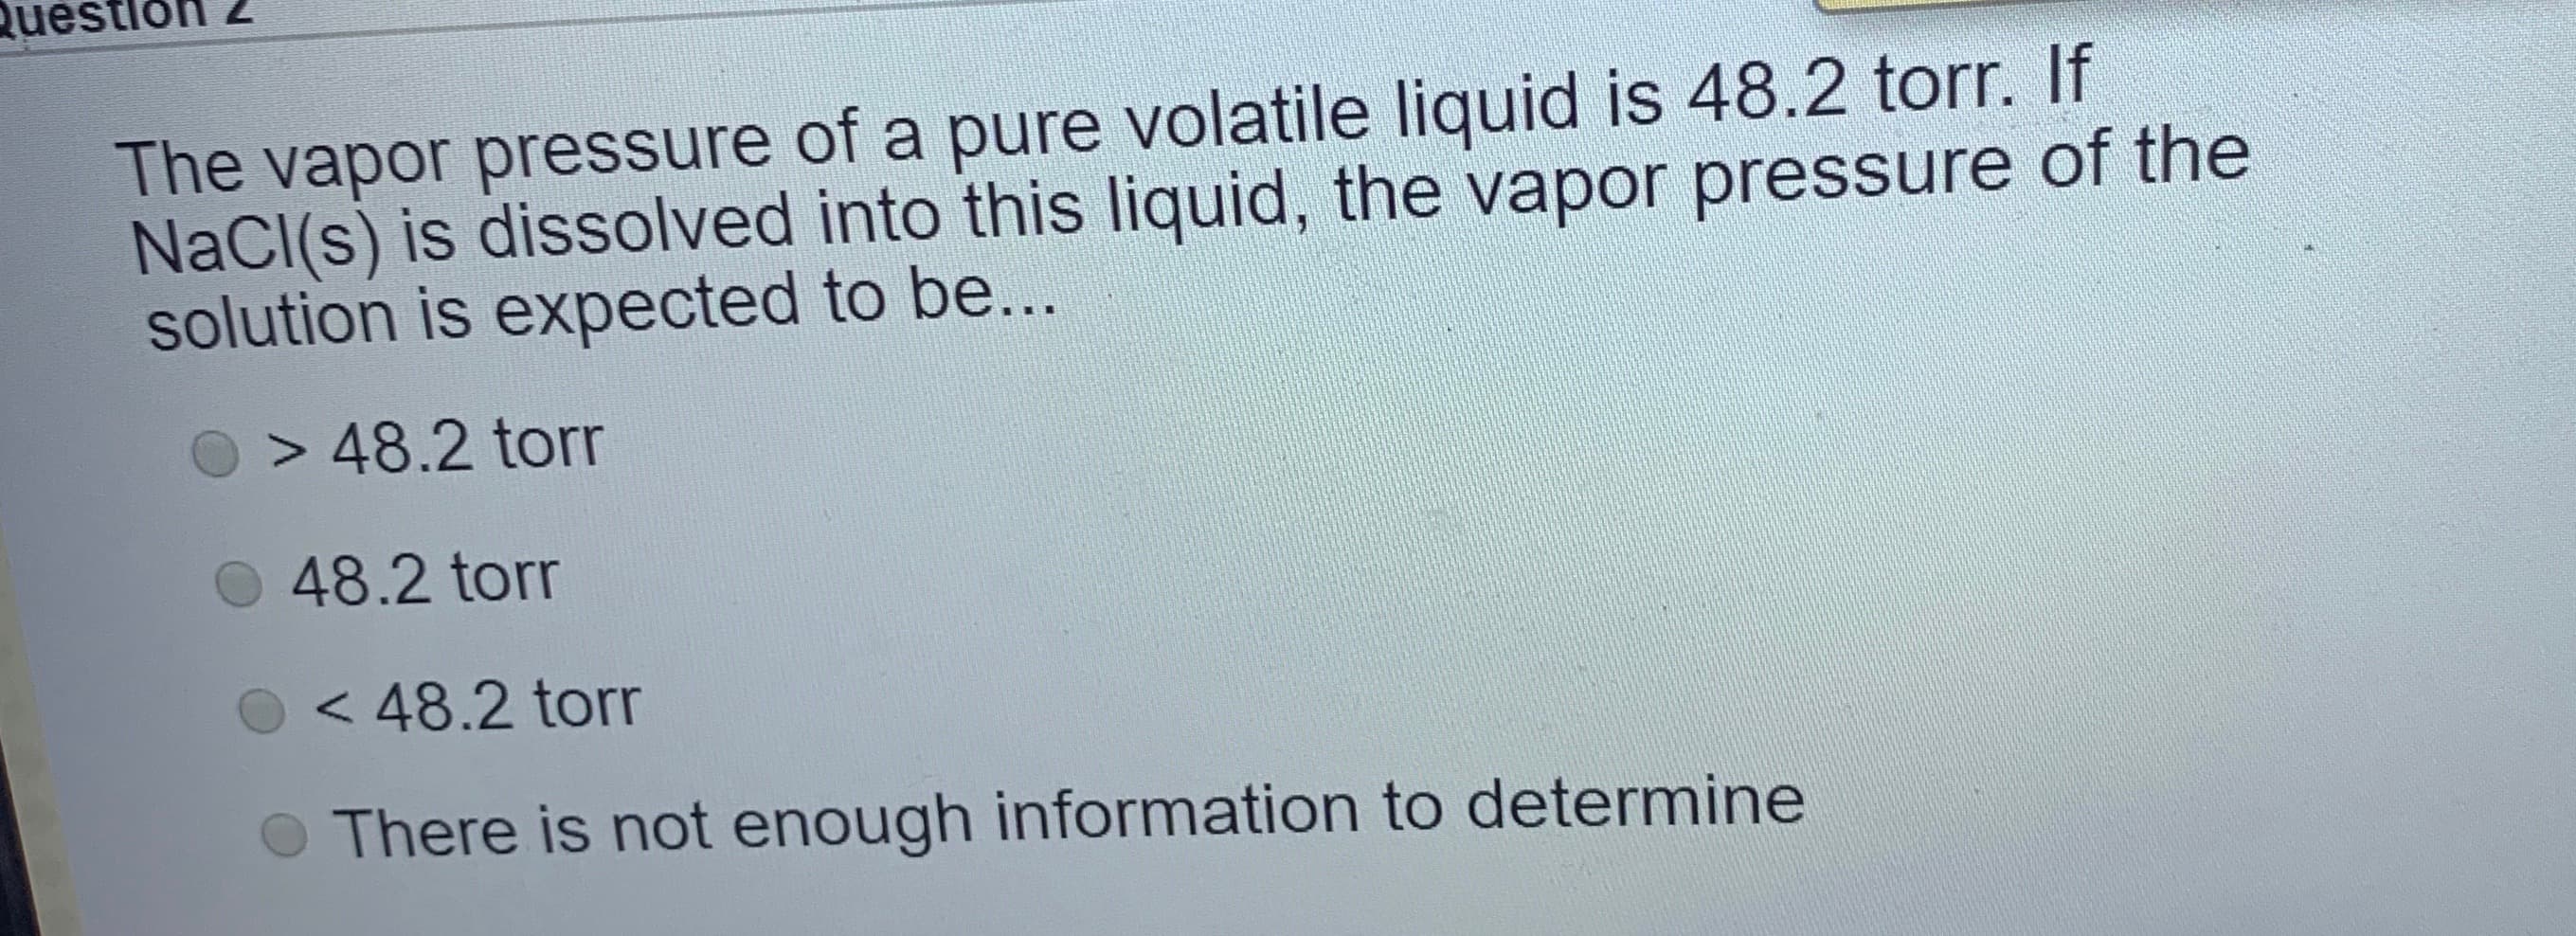 The vapor pressure of a pure volatile liquid is 48.2 tor. If
NaCl(s) is dissolved into this liquid, the vapor pressure of the
solution is expected to be...
